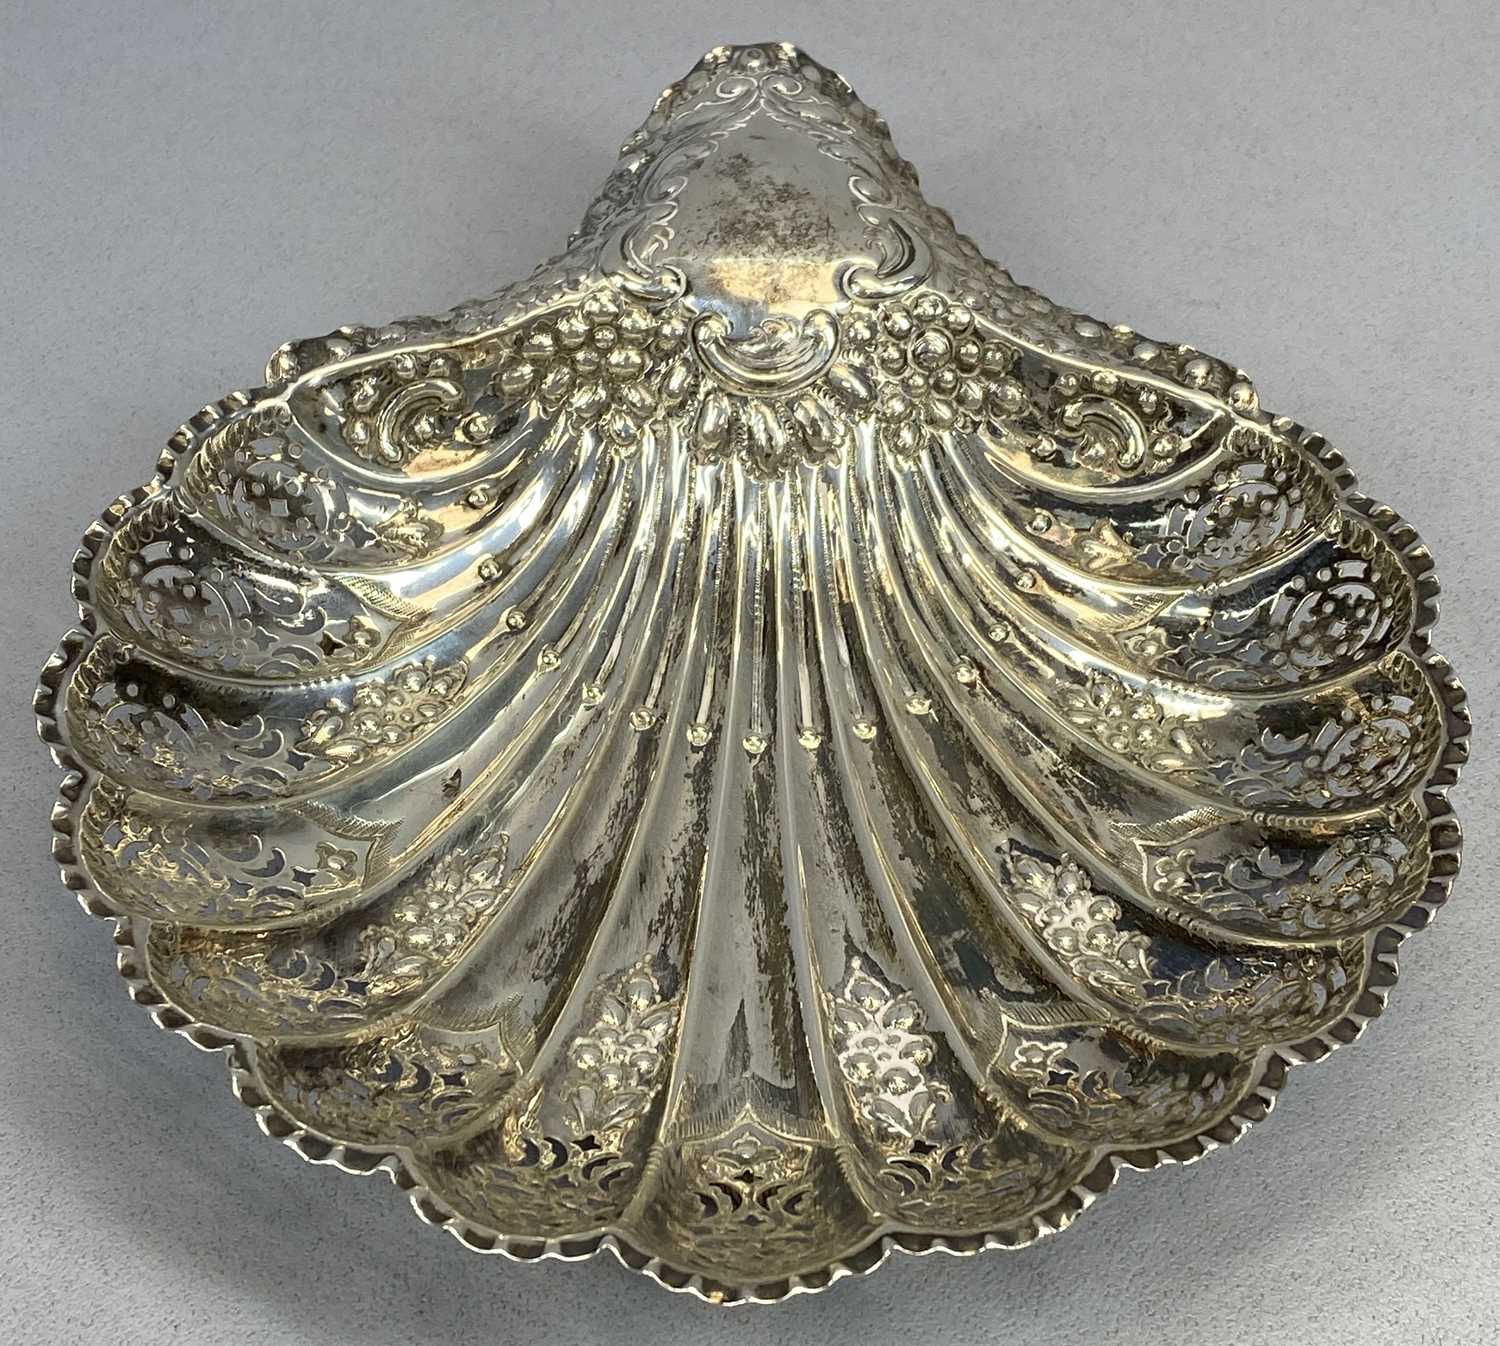 VICTORIAN SILVER SHELL FORM FRUIT DISH, Sheffield 1896, Atkin Brothers, having a crimped and